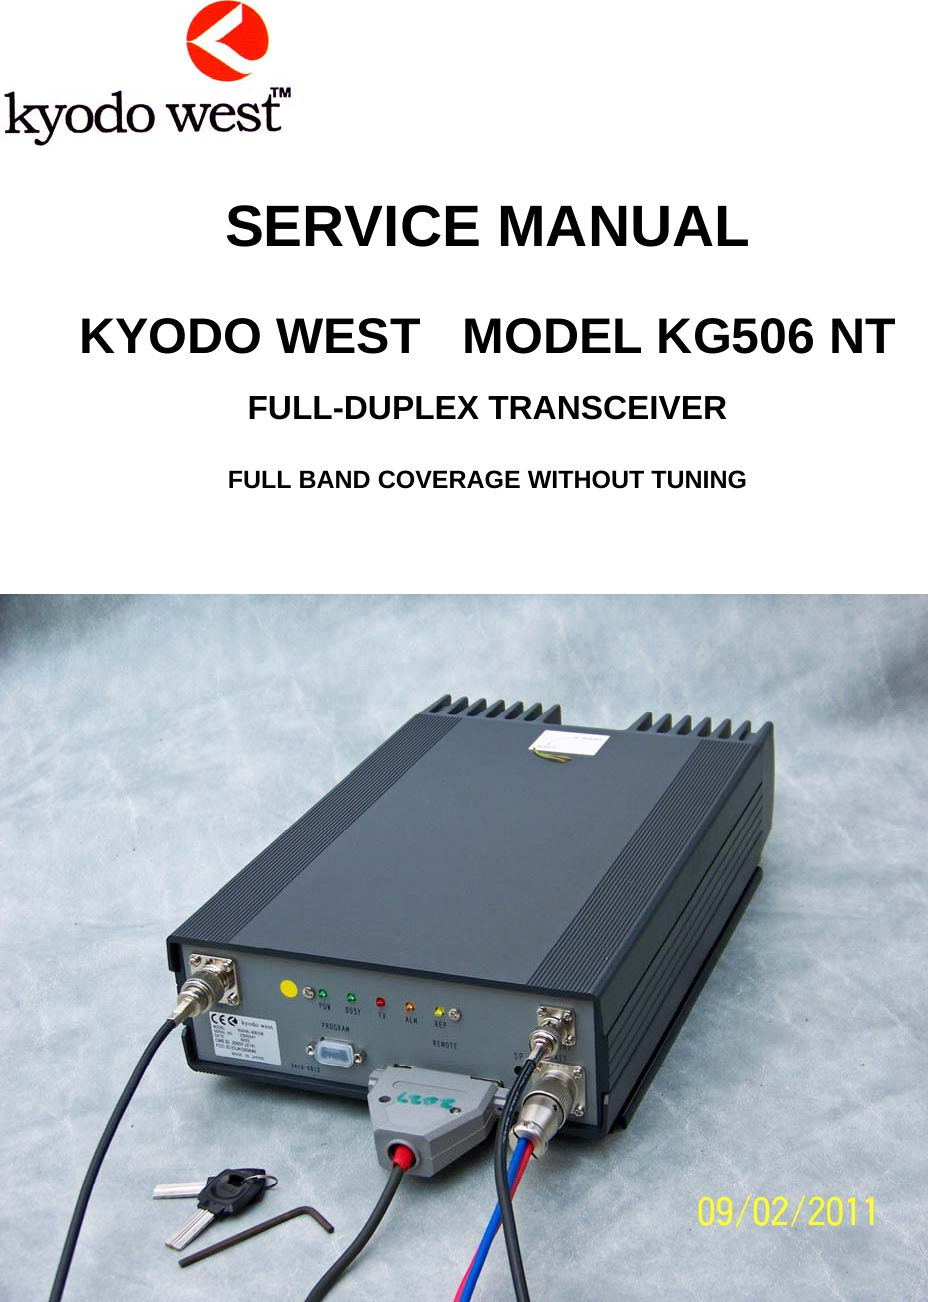   SERVICE MANUAL   KYODO WEST   MODEL KG506 NT  FULL-DUPLEX TRANSCEIVER  FULL BAND COVERAGE WITHOUT TUNING       